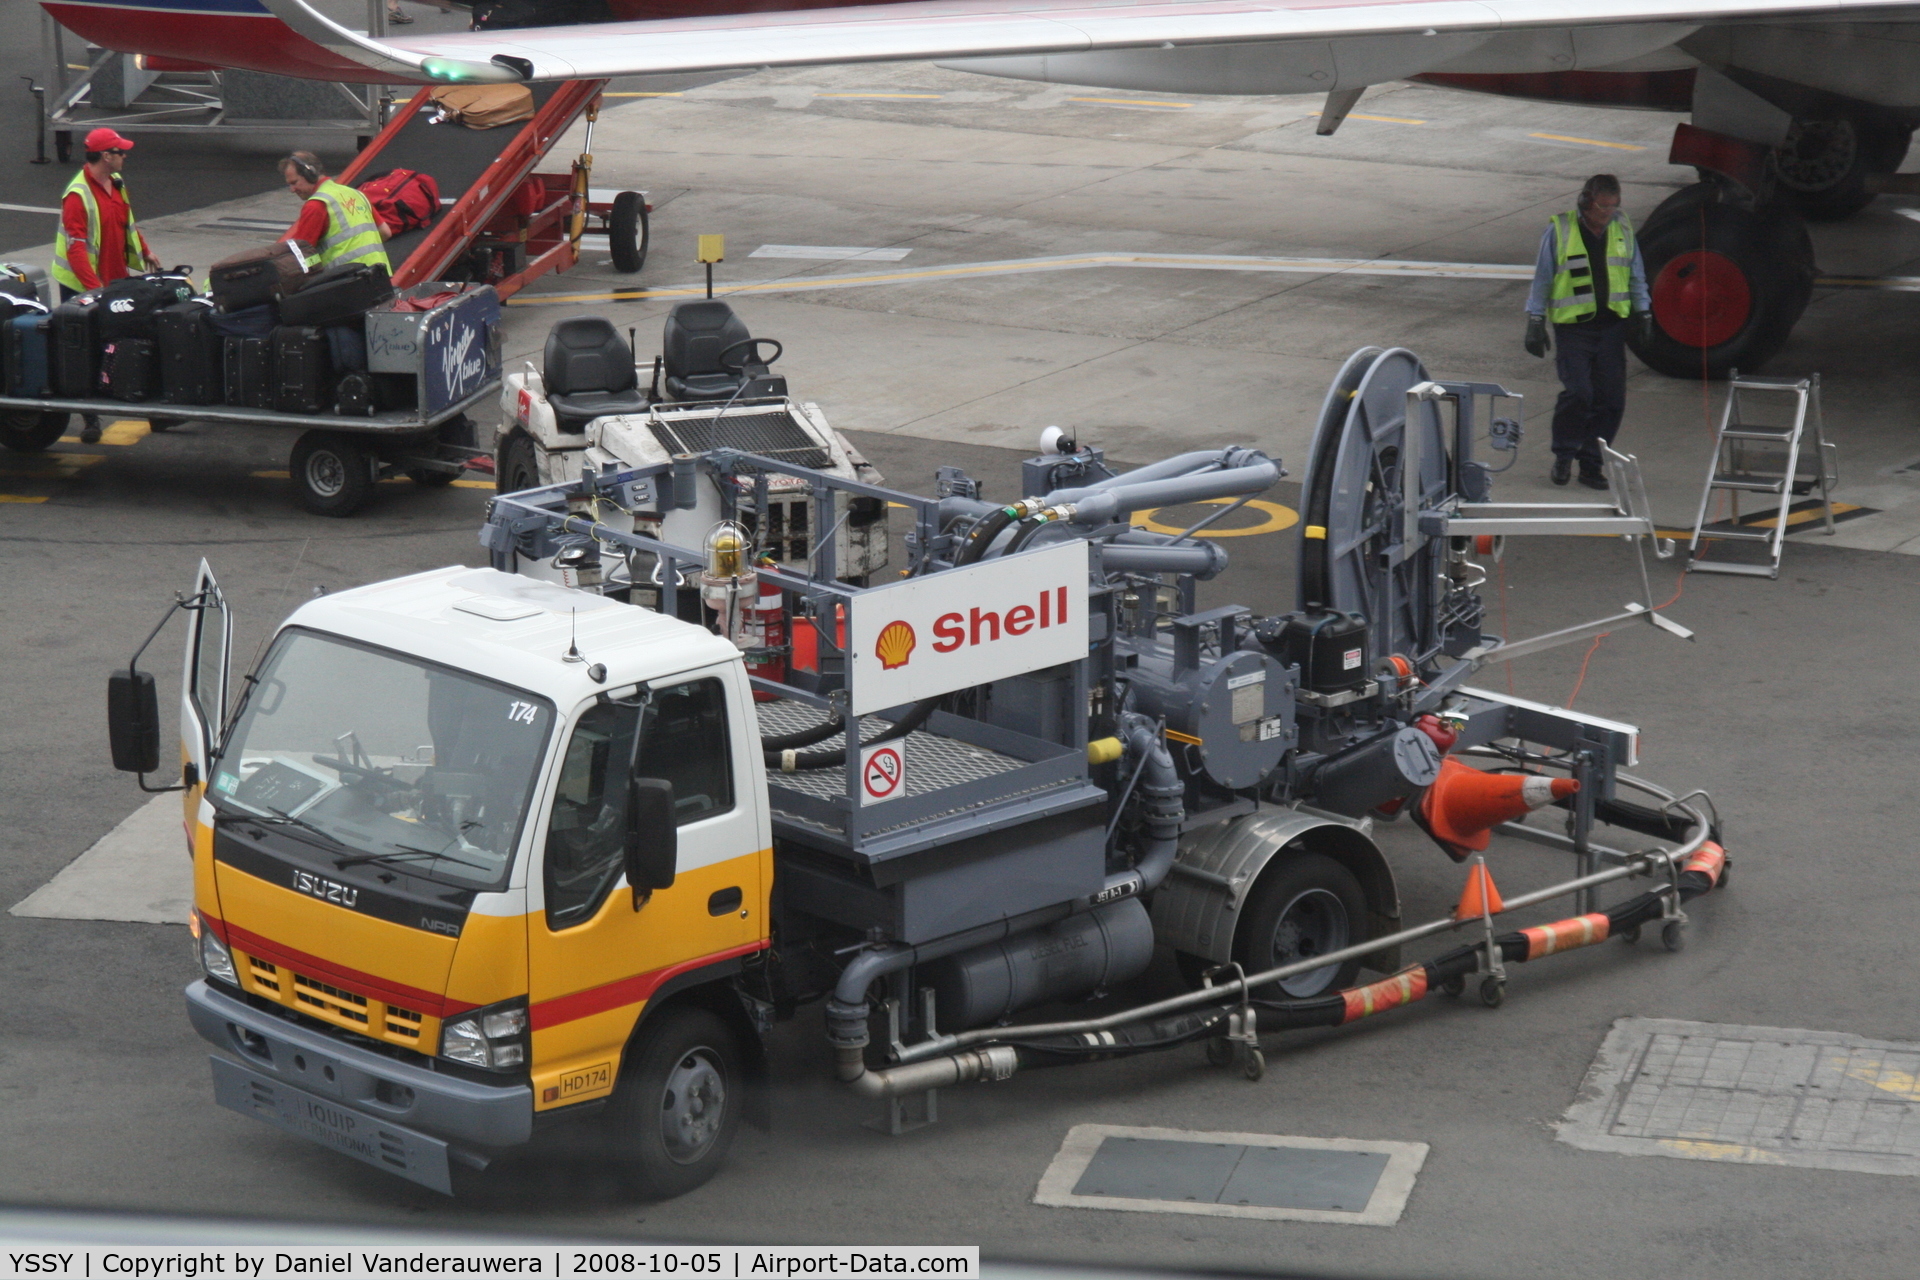 Sydney Airport, Mascot, New South Wales Australia (YSSY) - technical assistance